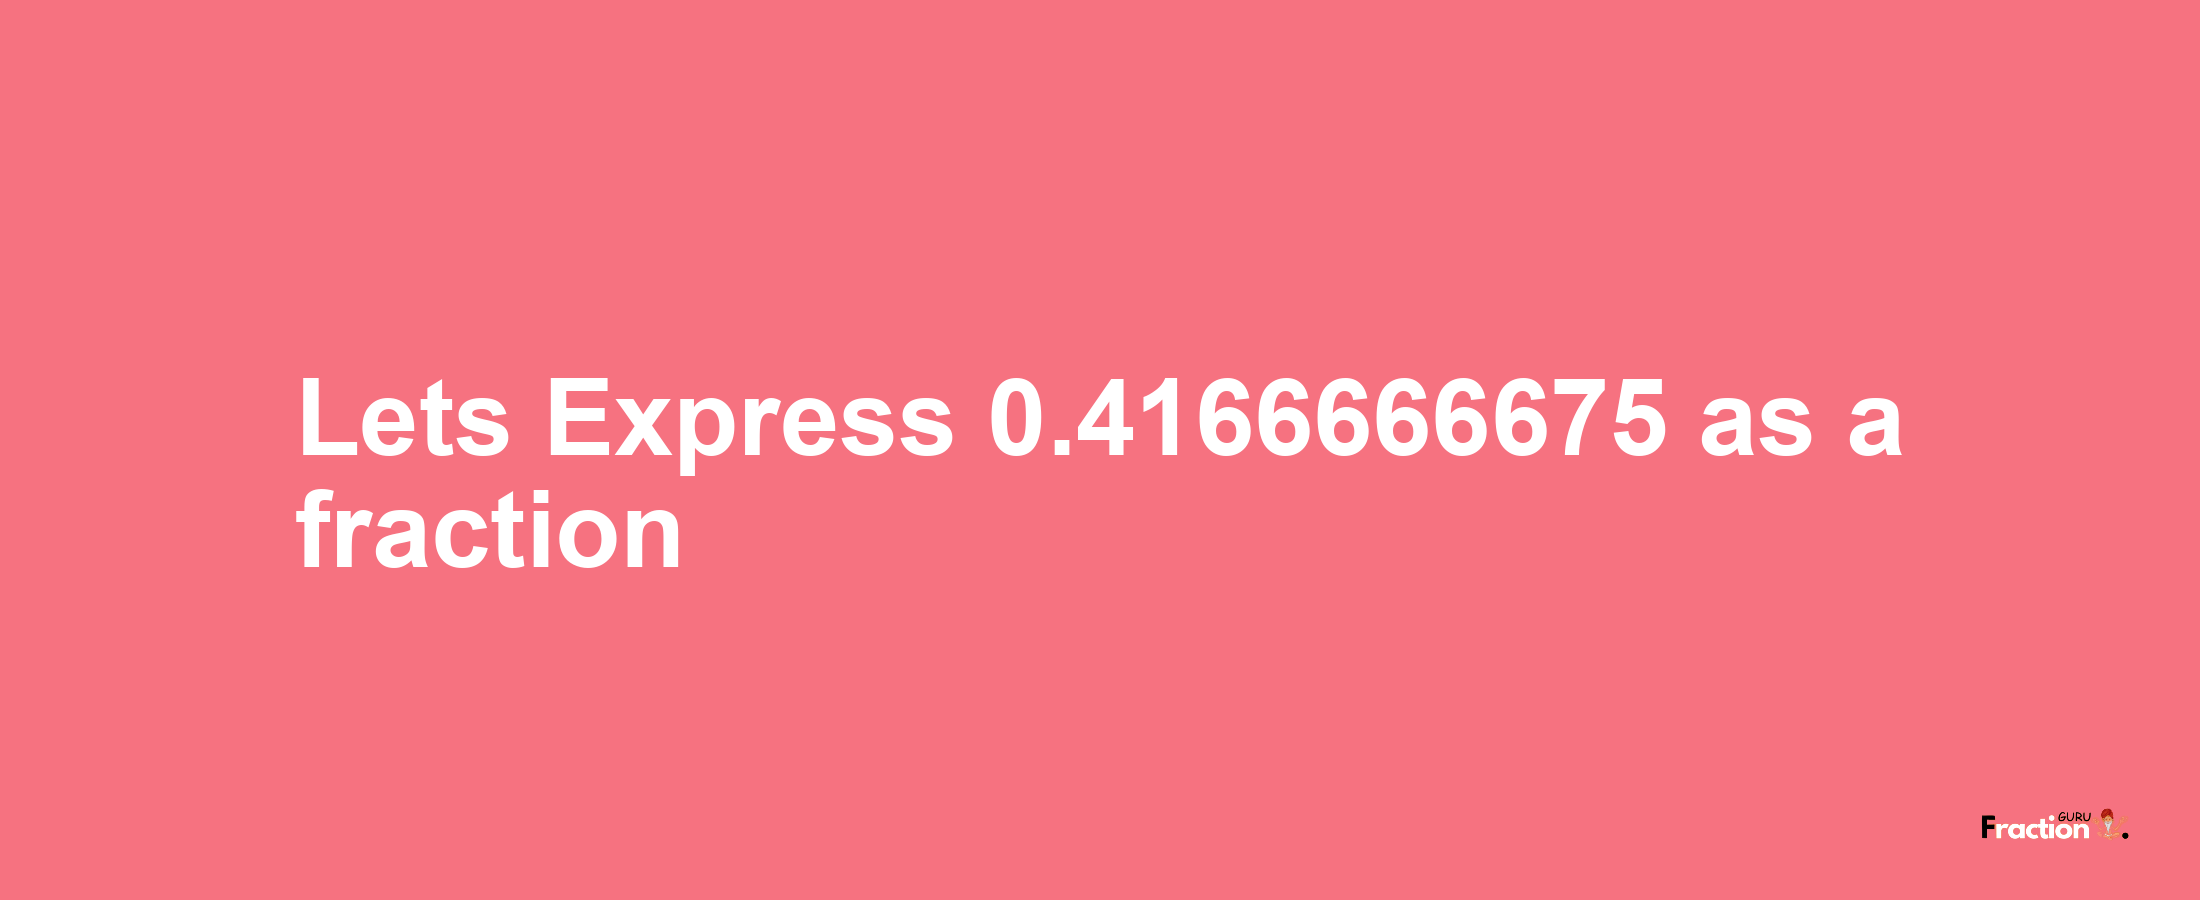 Lets Express 0.4166666675 as afraction